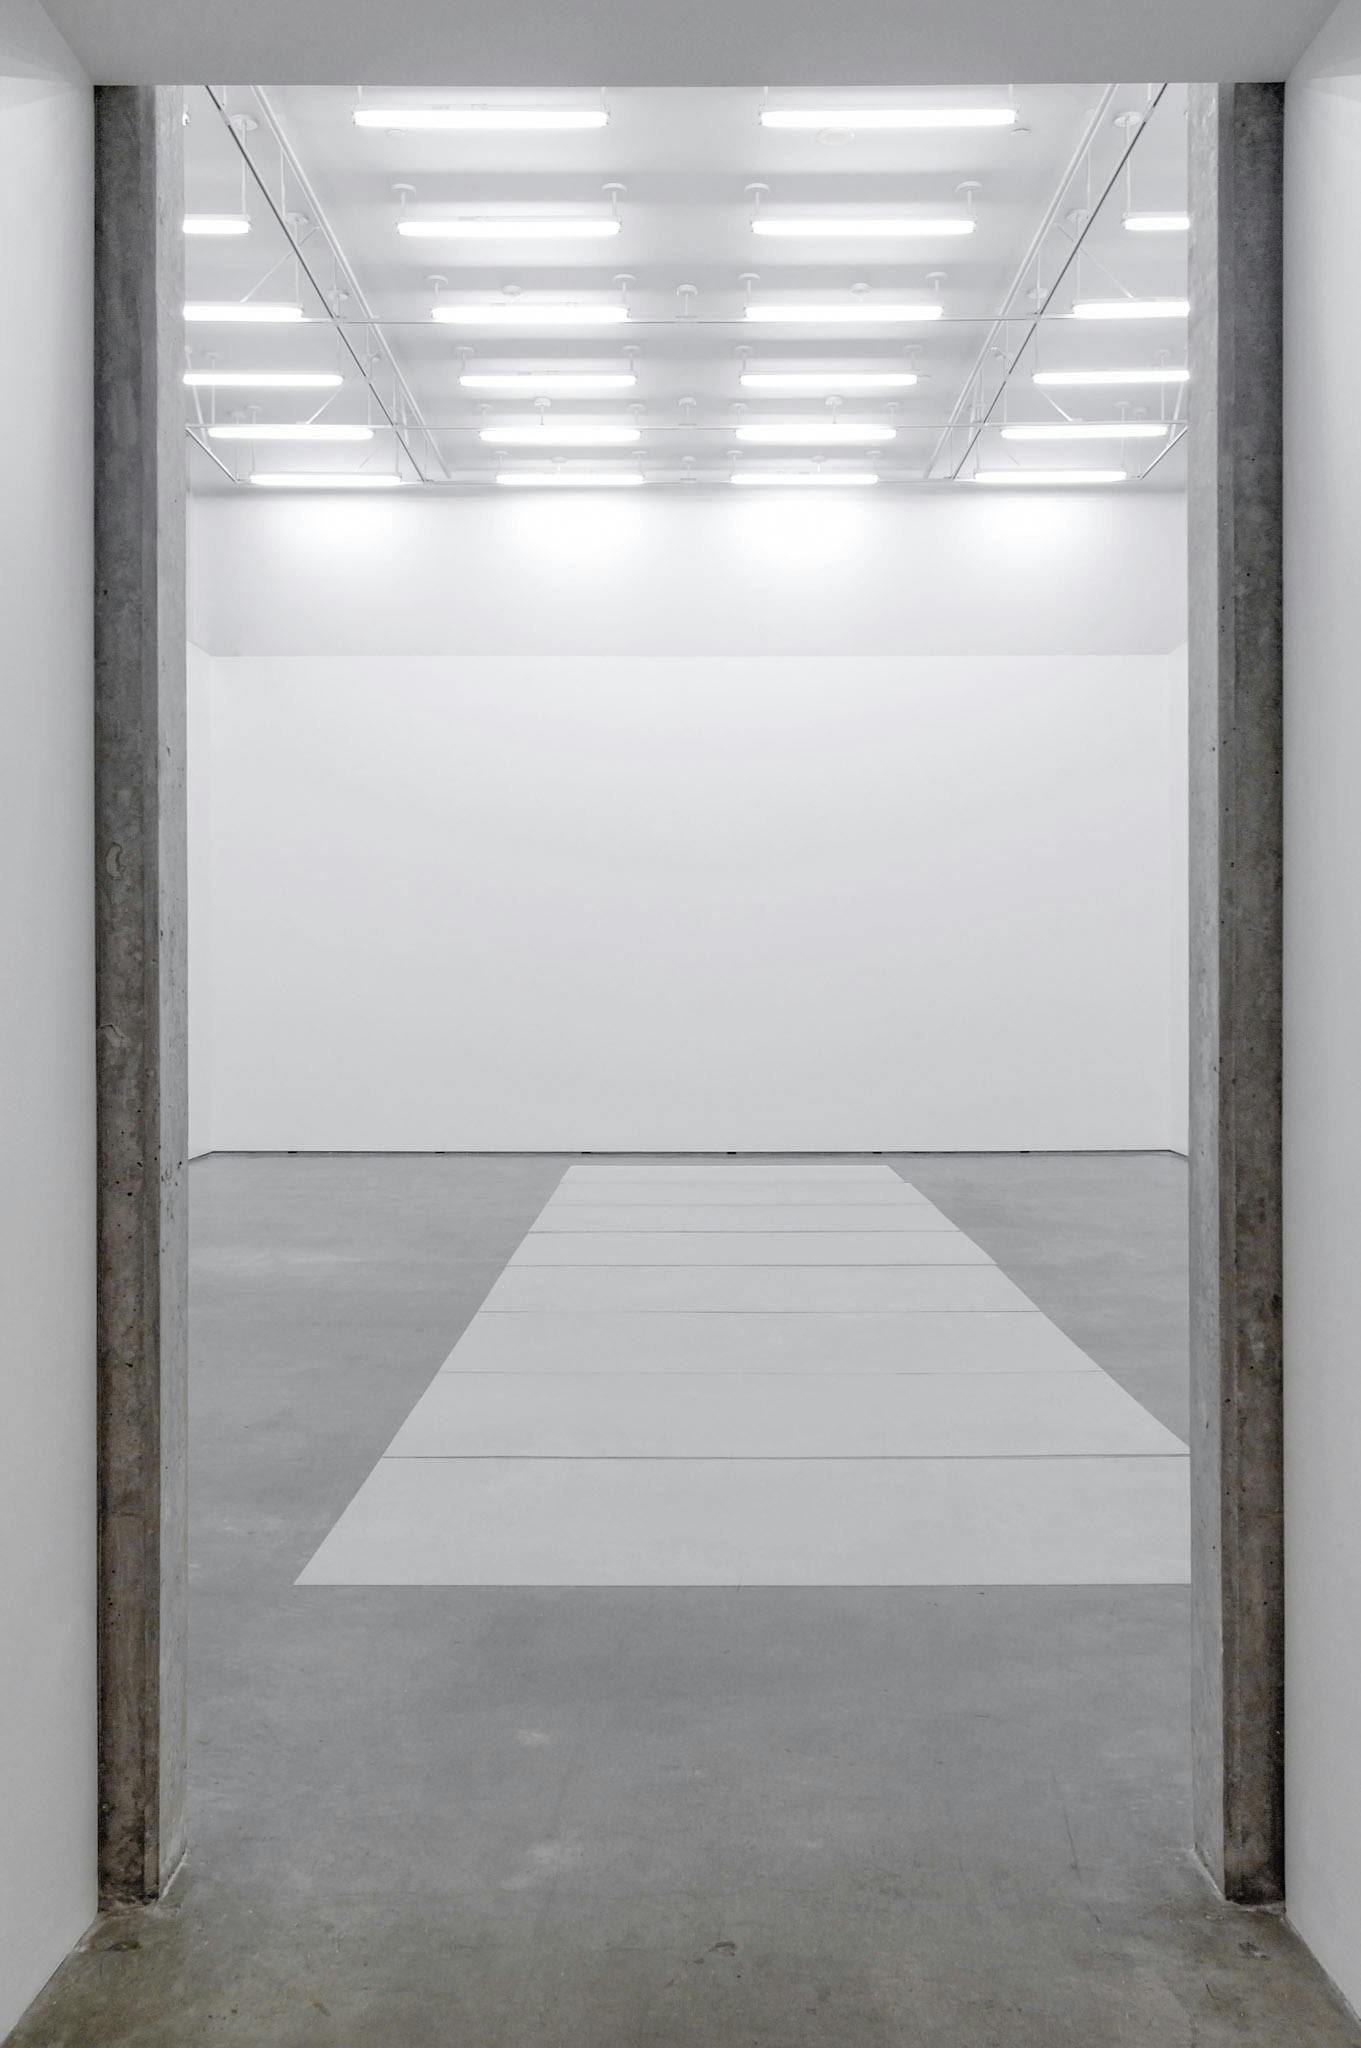 A number of rectangular-shaped mirrors are placed in a row on the gallery floor. In the same gallery space, many white fluorescent lights are installed in rows on the ceiling. 